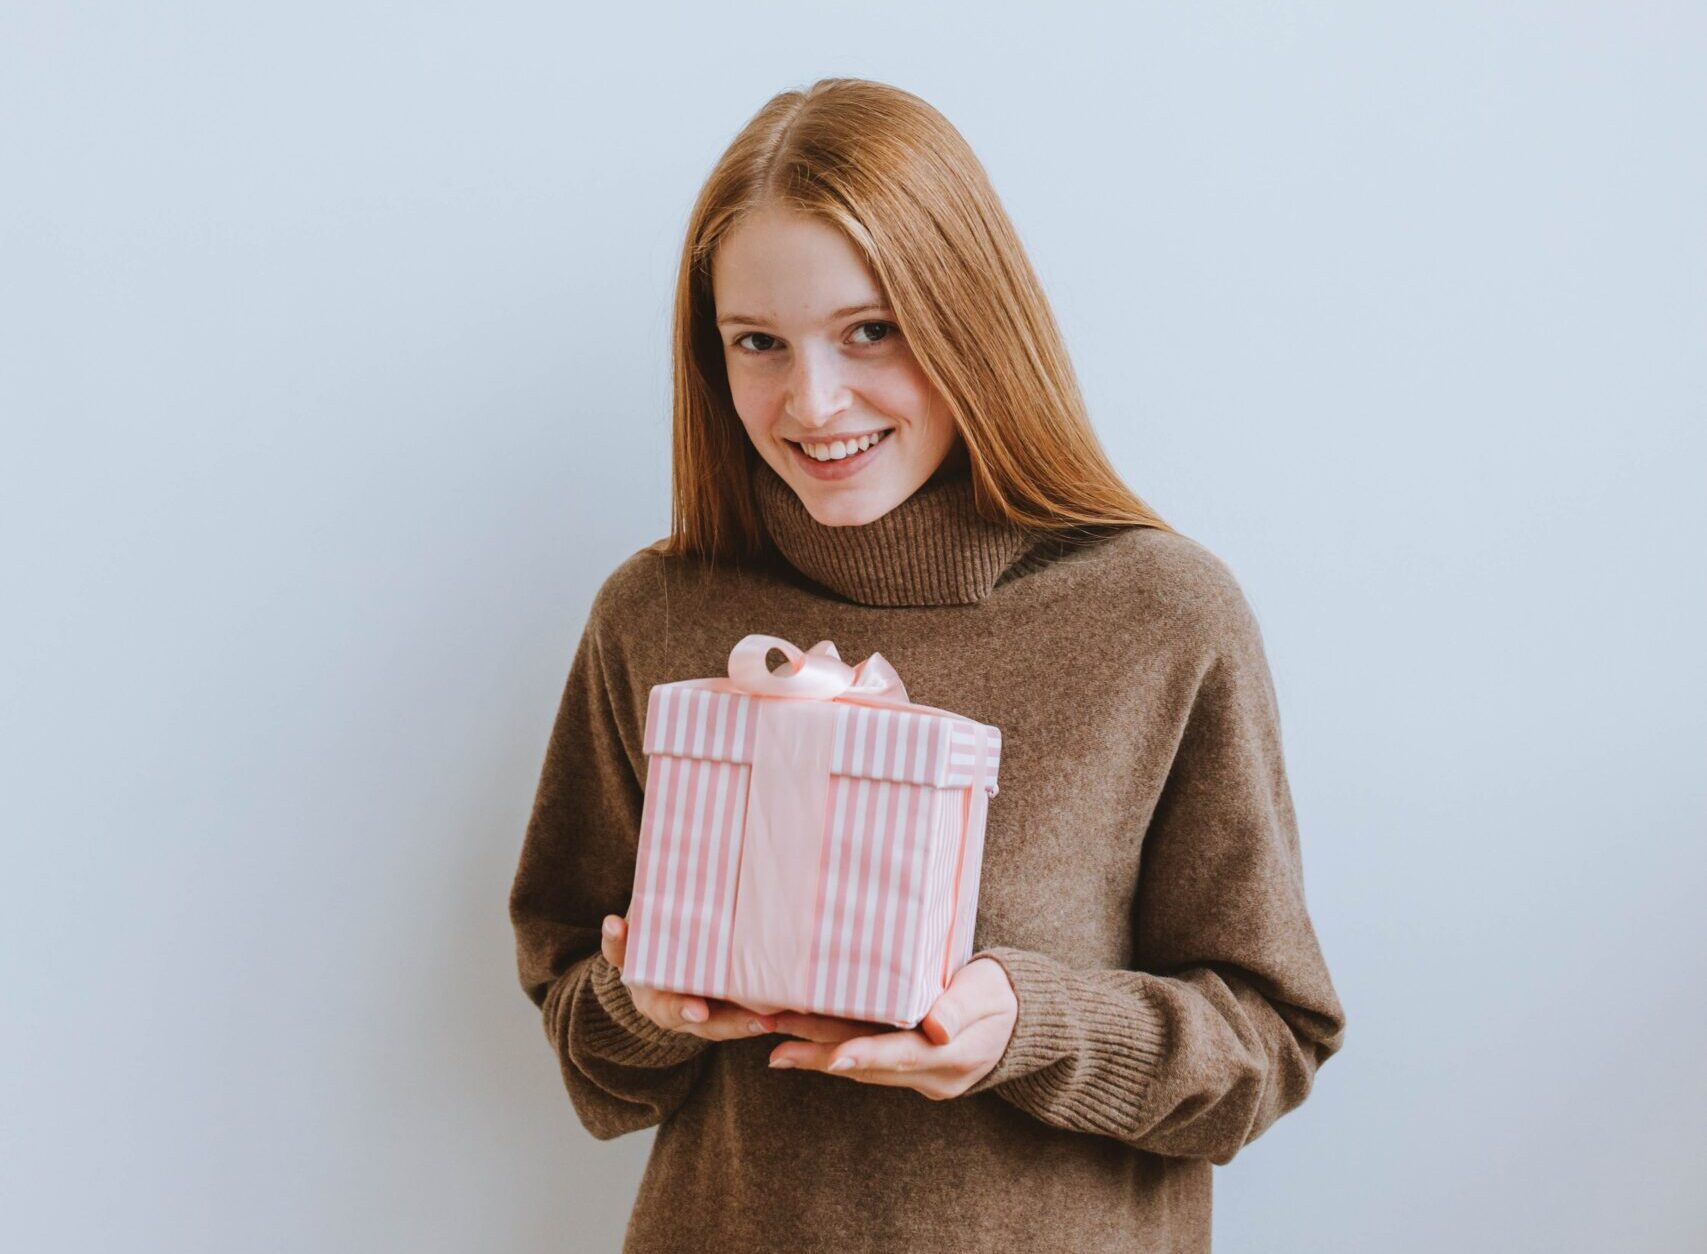 redheaded girl holding white and red present rpm living blog last minute holiday gift ideas